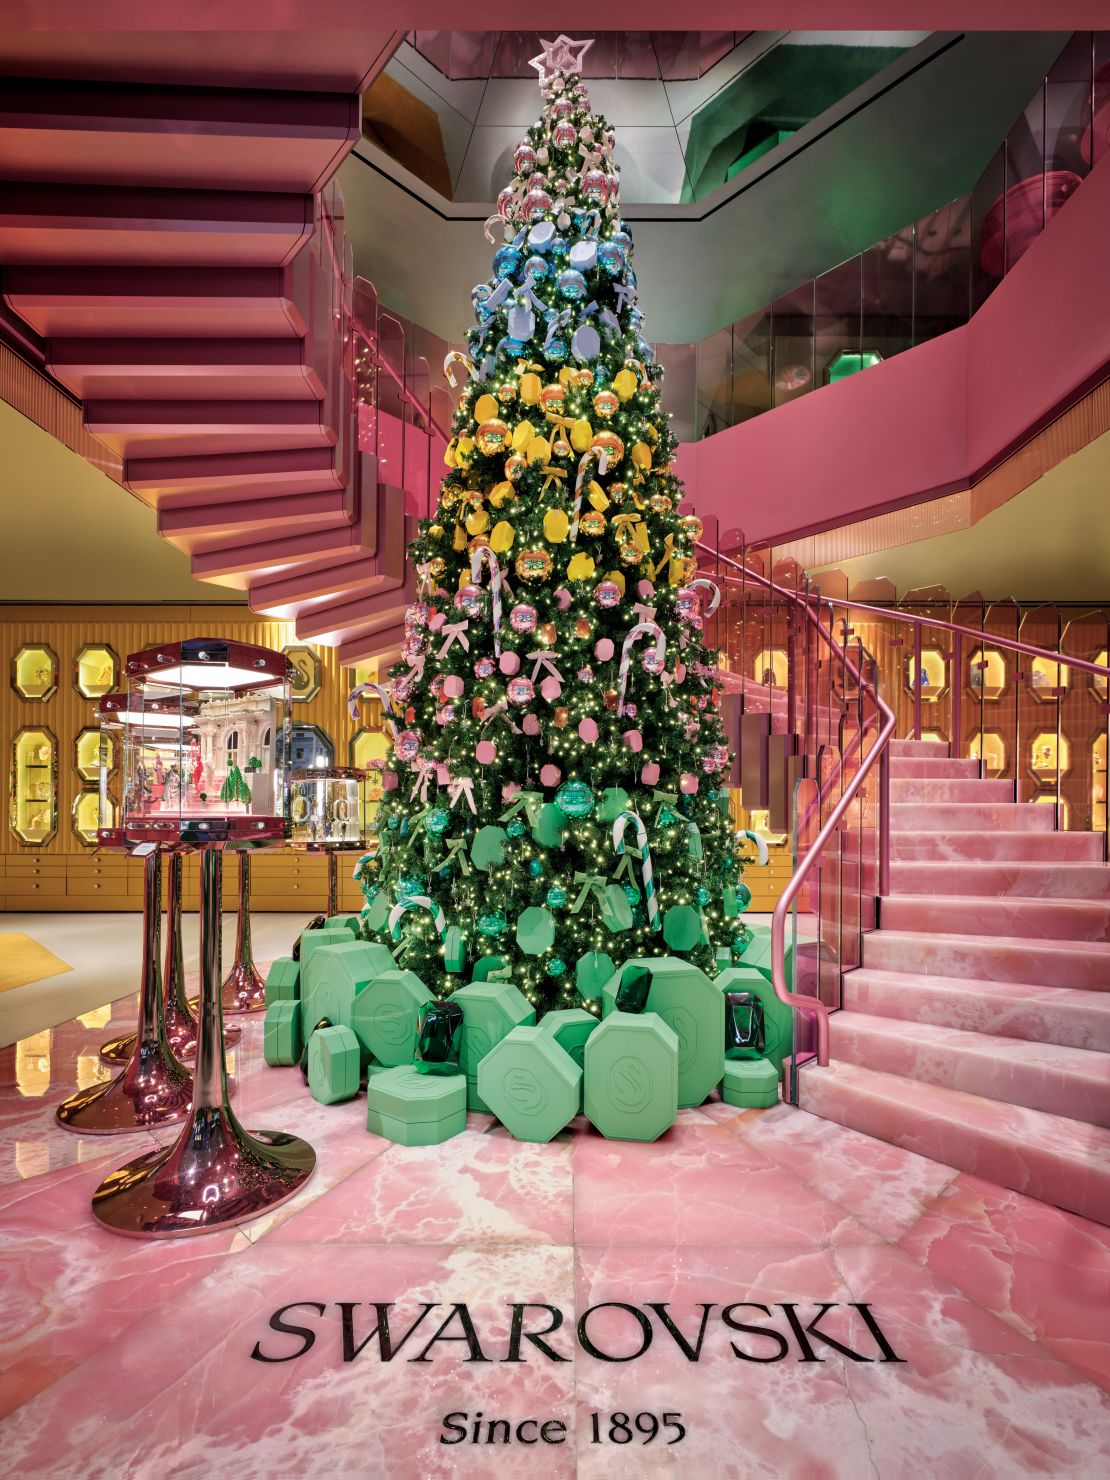 Given the season, the store currently features a large-scale Christmas tree, decorated in an ombré pattern with baubles whose color palette matches the space just so.